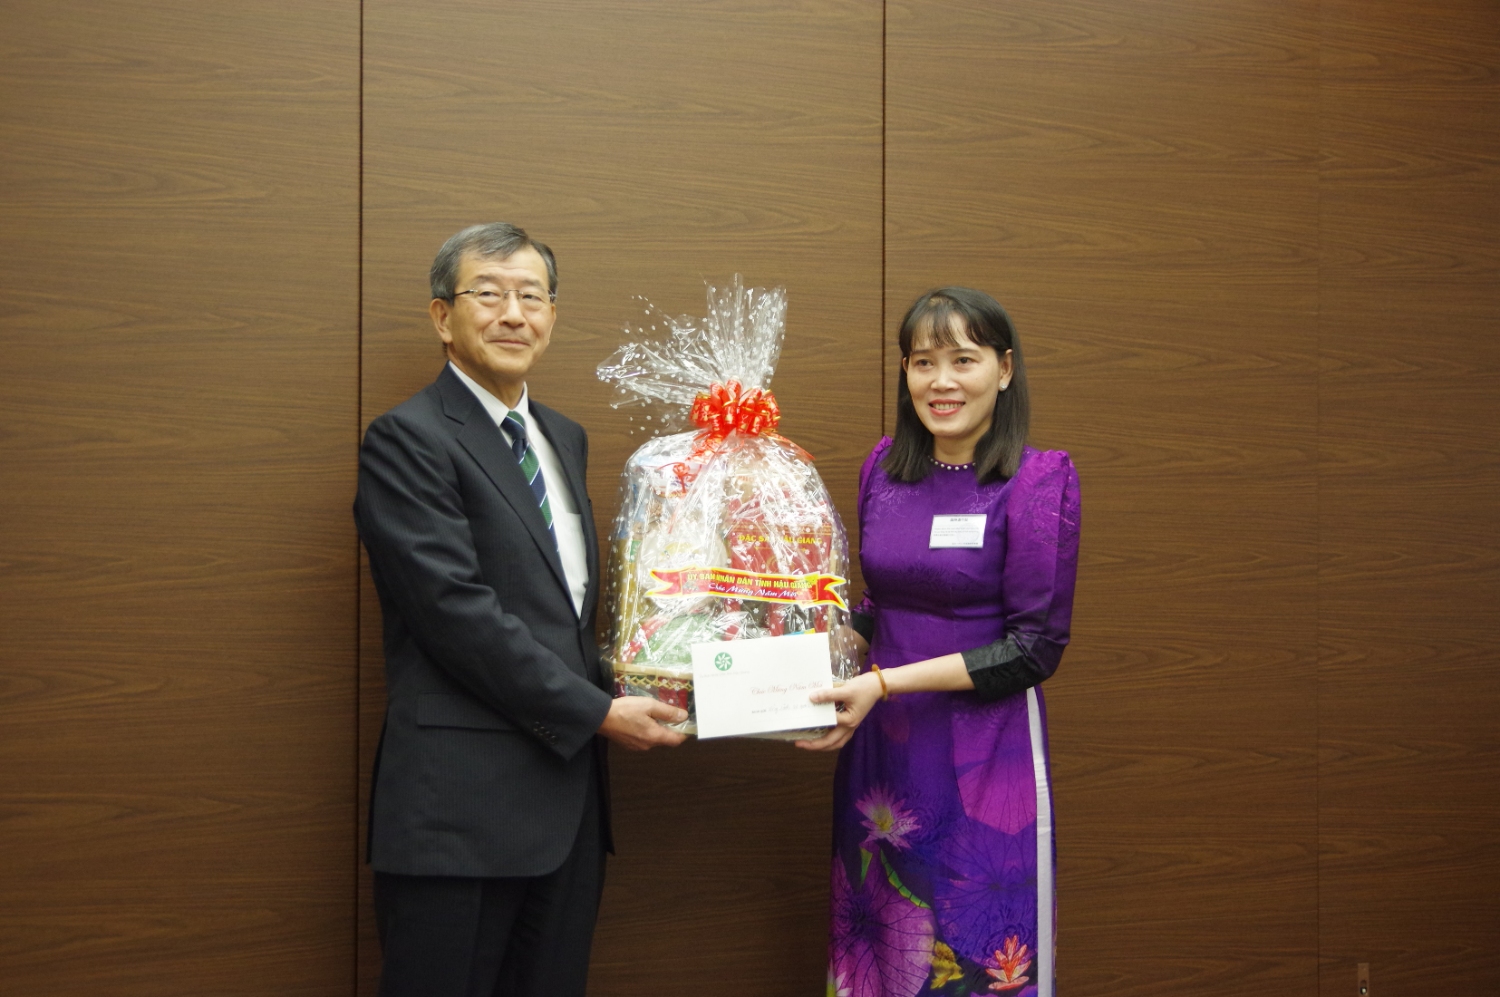 Ms. Ho Thu Anh - Vice Chairman of the Provincial People's Committee greets and wished Lunar New Year for Consulate General of Japan in Ho Chi Minh City.